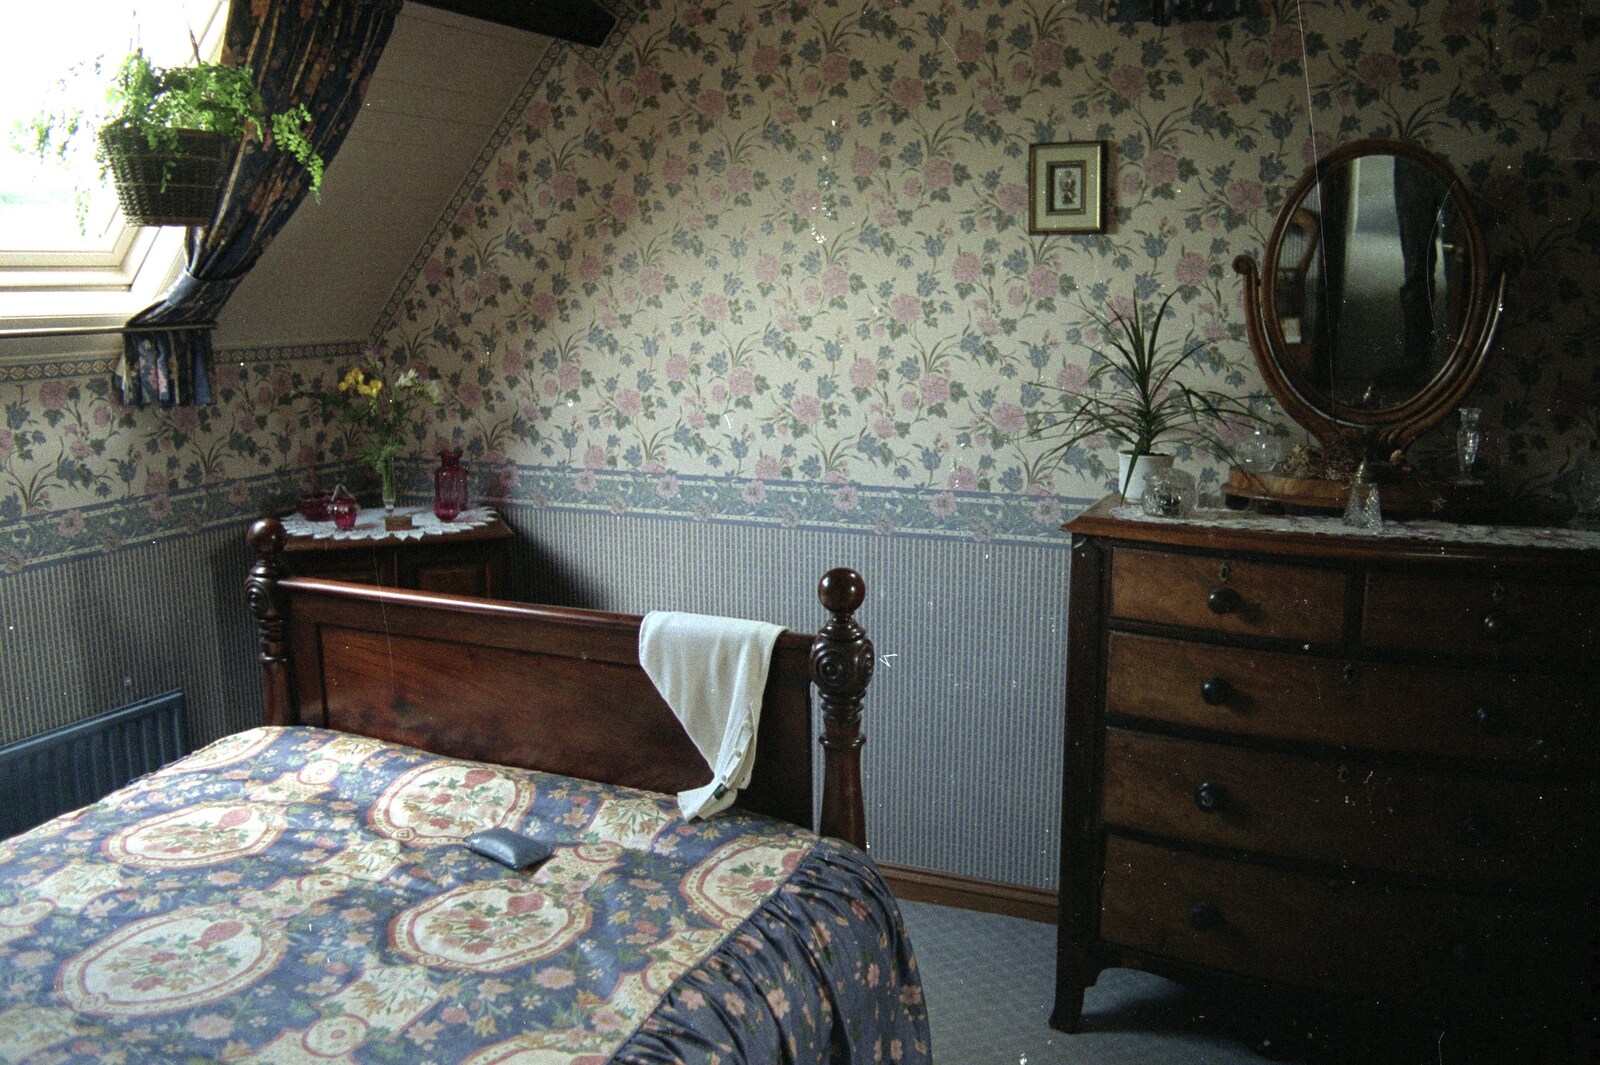 The spare bedroom from Plymouth and The Chapel, Hoo Meavy, Devon - 25th July 1991